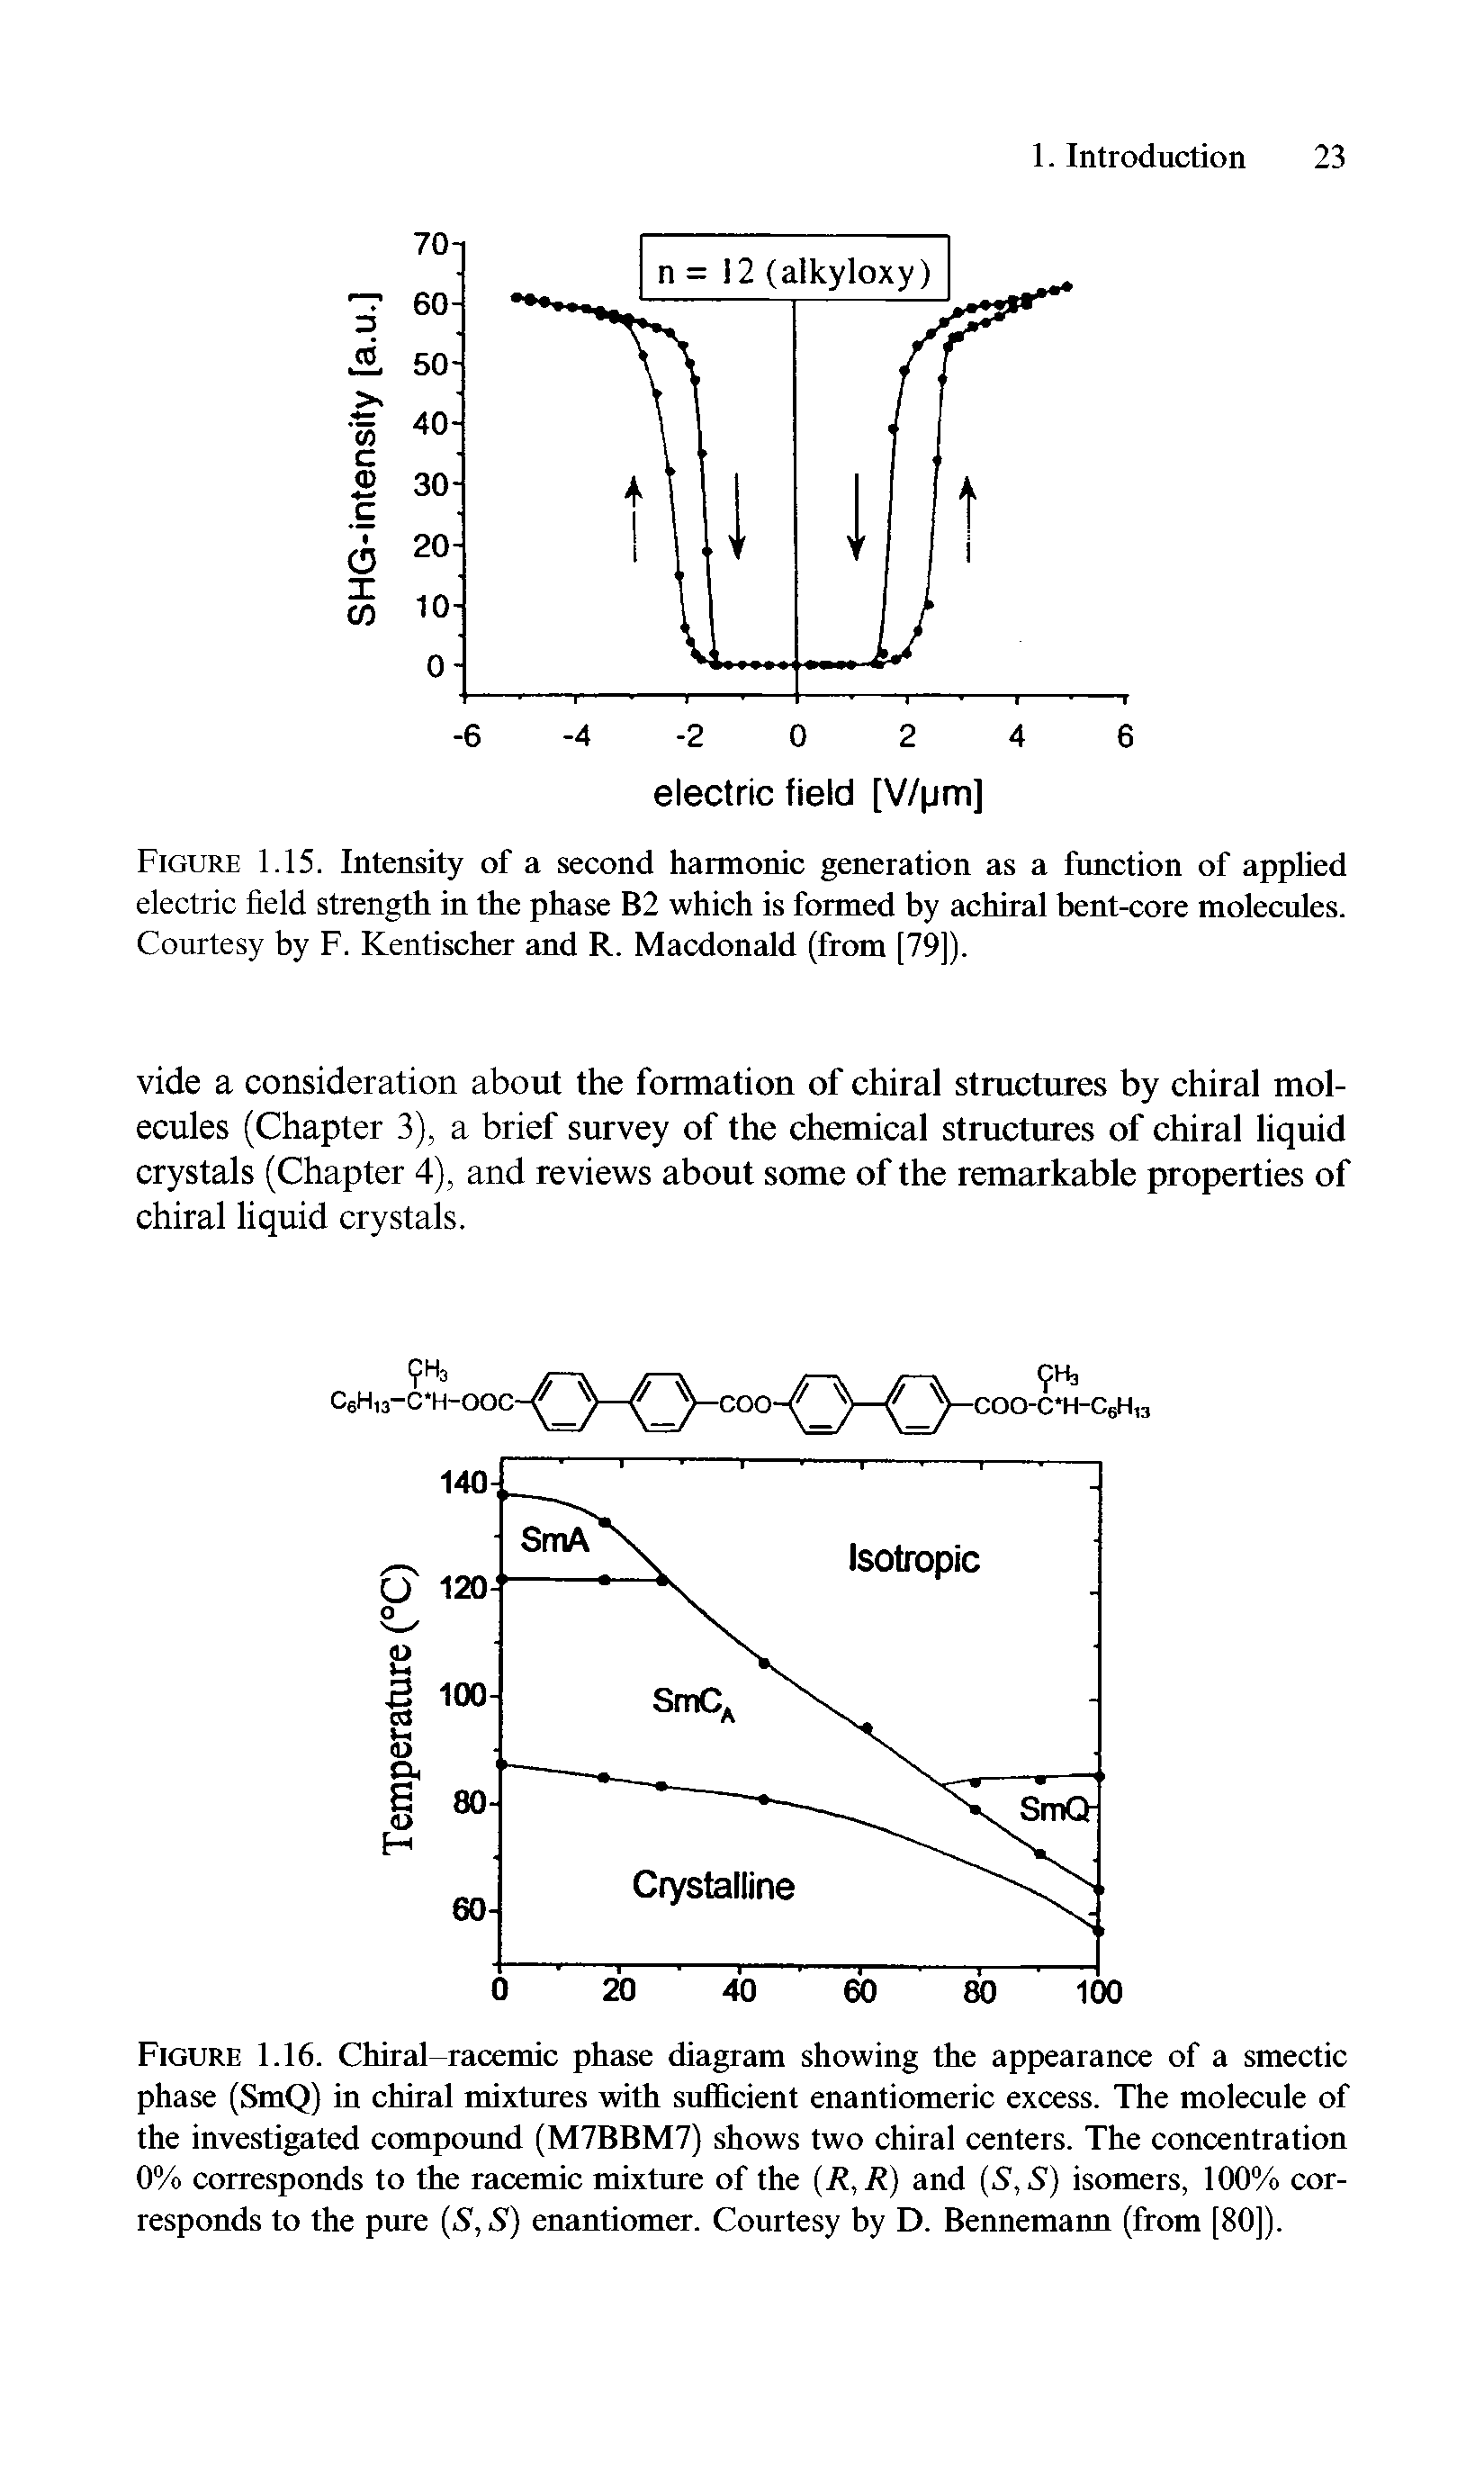 Figure 1.15. Intensity of a second harmonic generation as a function of applied electric field strength in the phase B2 which is formed by achiral bent-core molecules. Courtesy by F. Kentischer and R. Macdonald (from [79]).